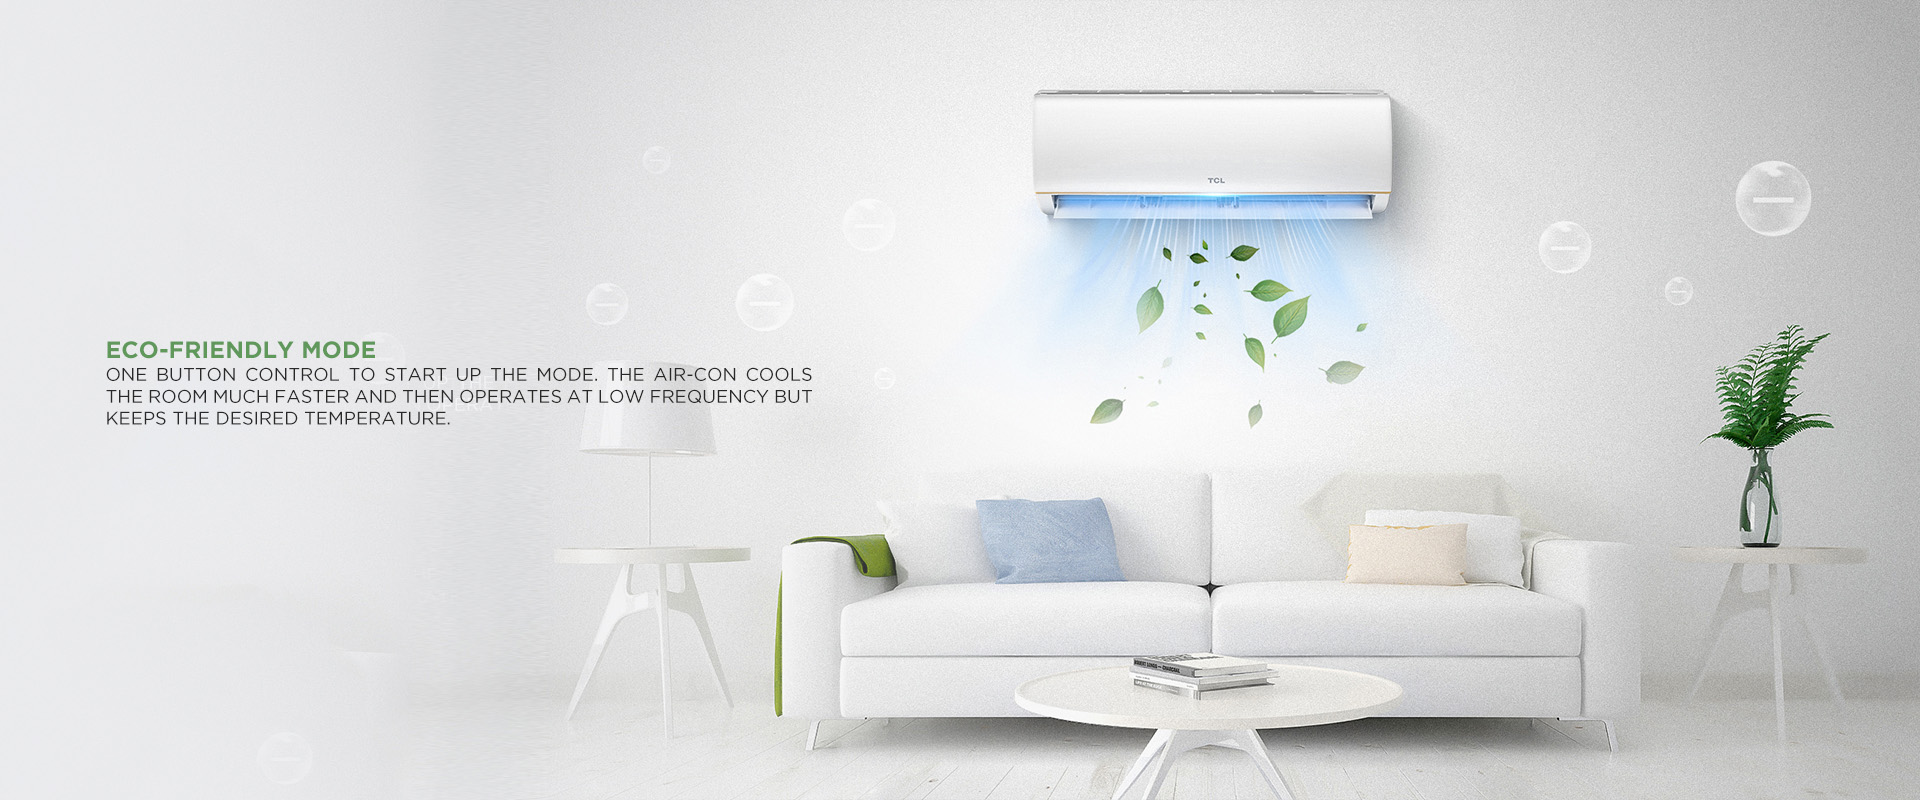 ECO-Friendly Mode - One button control to start up the mode. The air-con cools the room much faster and then operates at low frequency but keeps the desired temperature. 